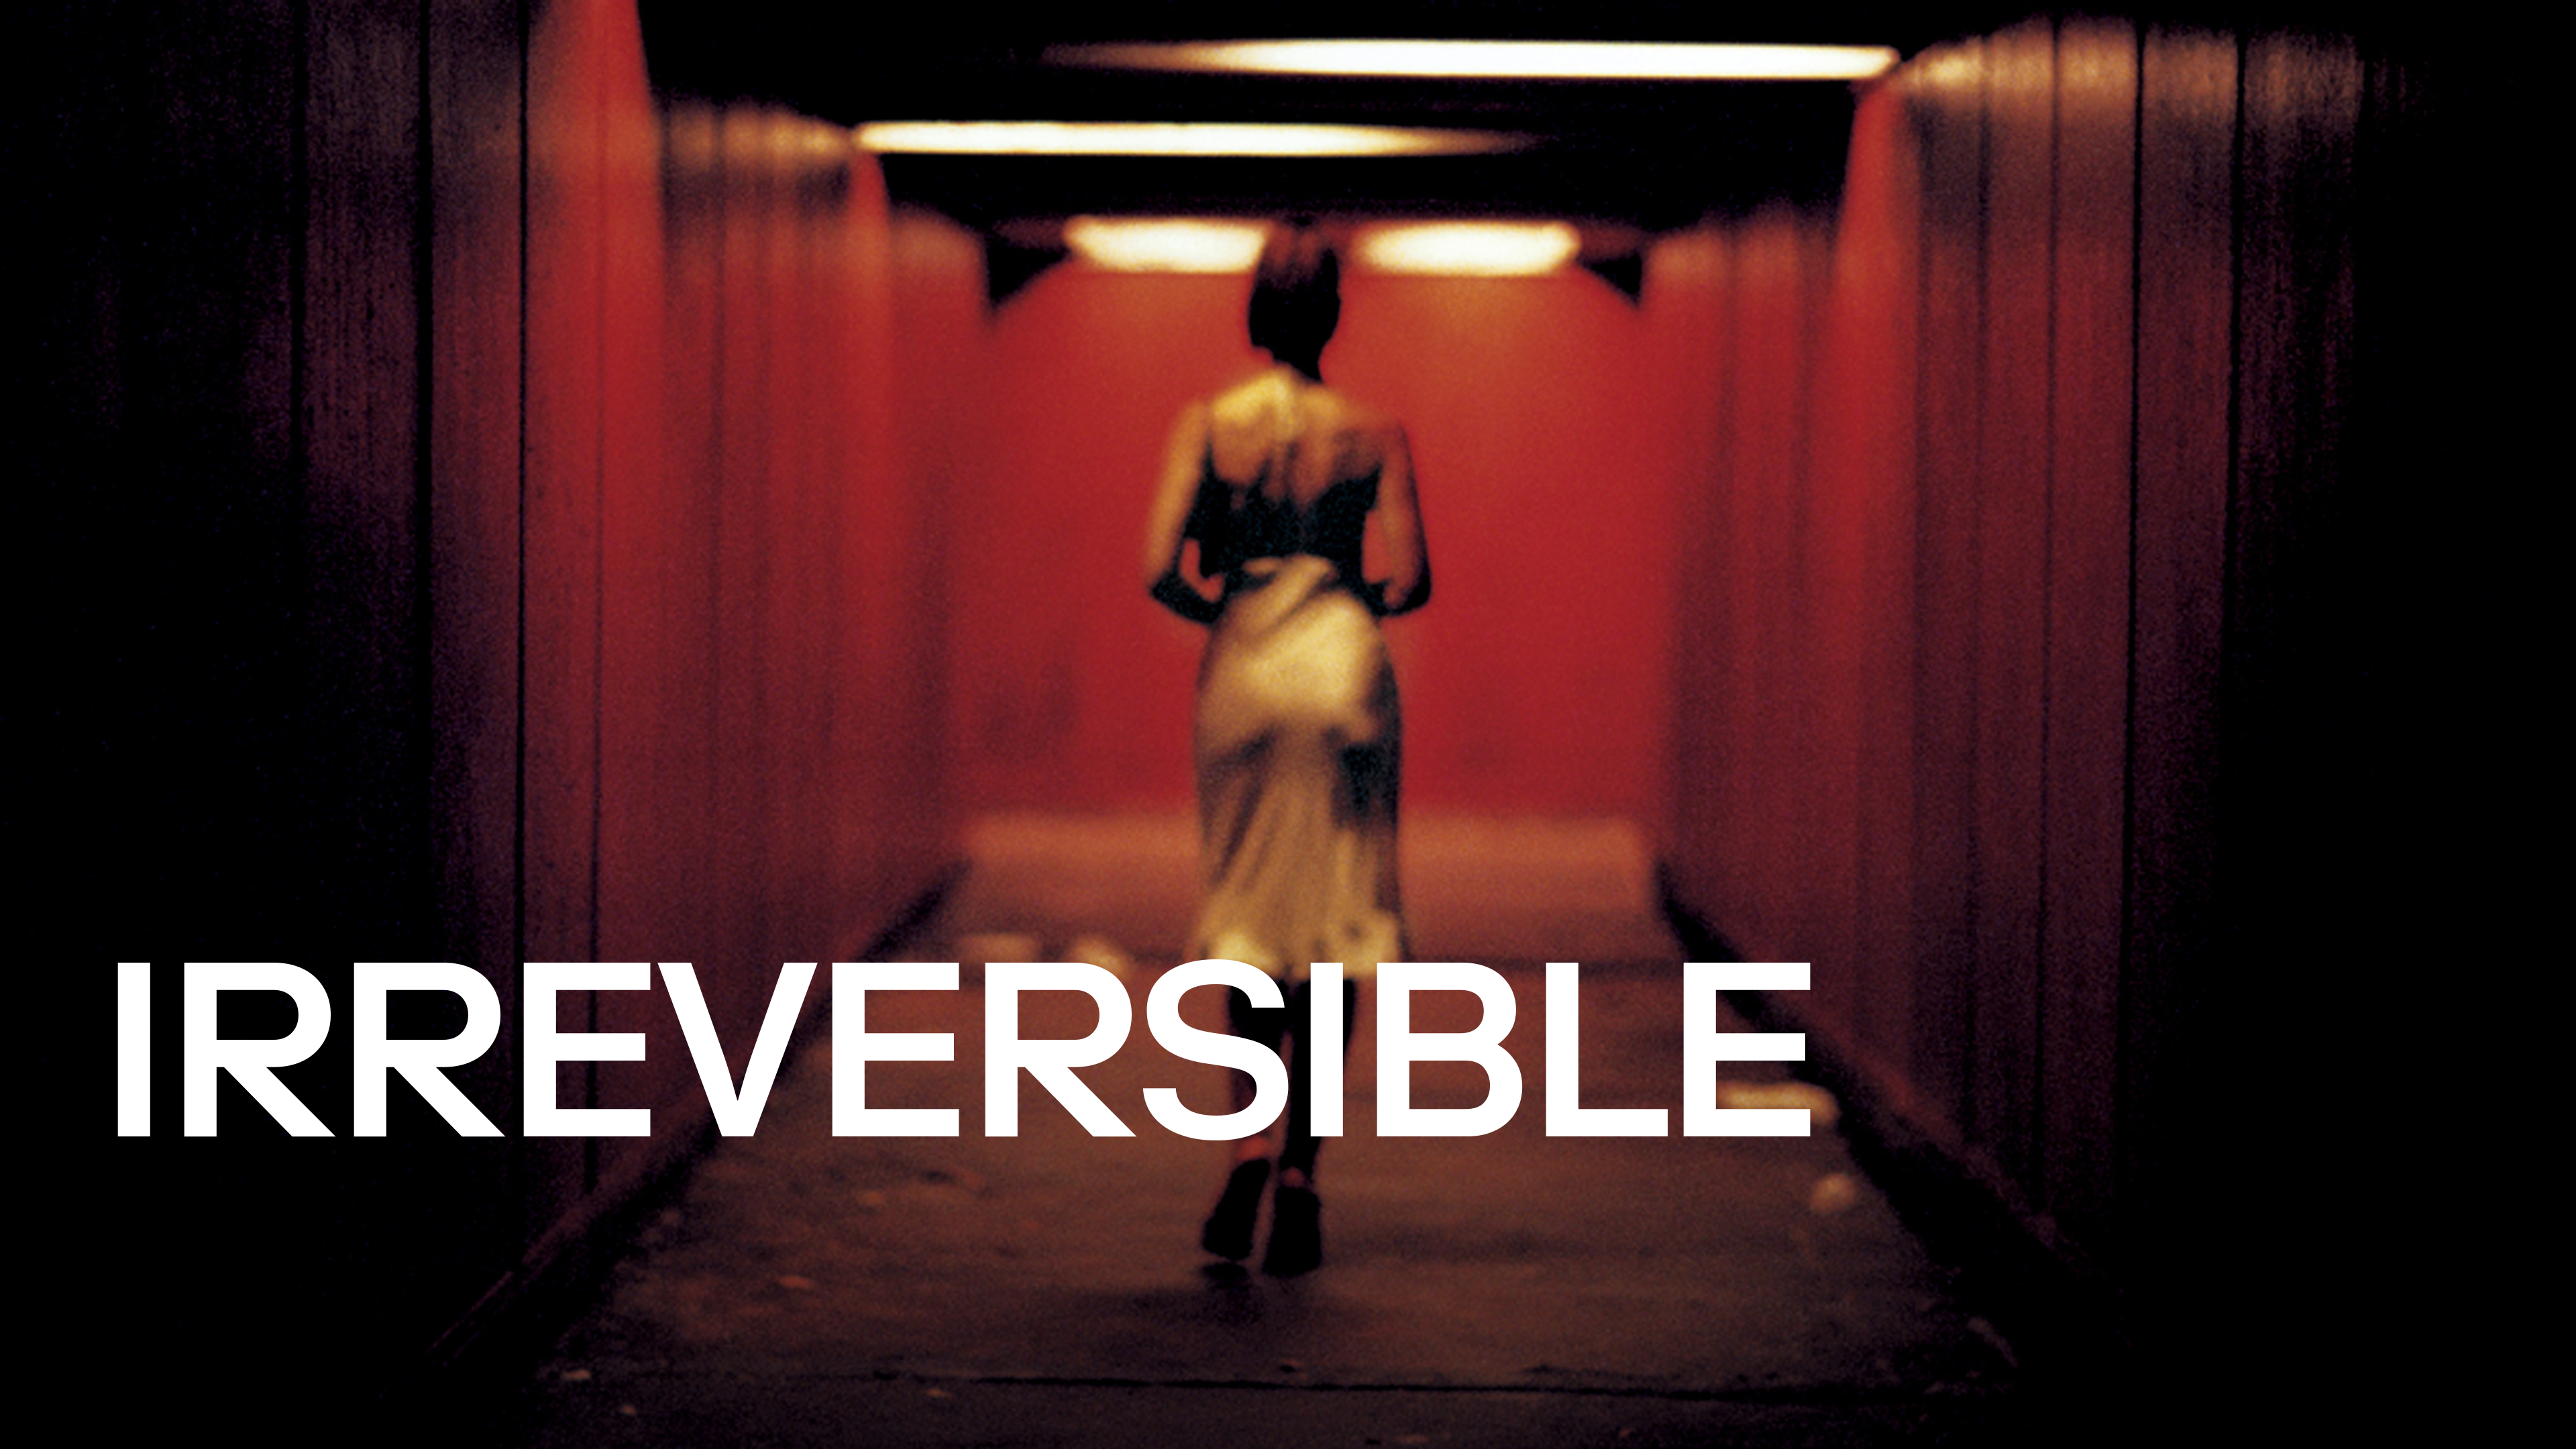 32-facts-about-the-movie-irreversible